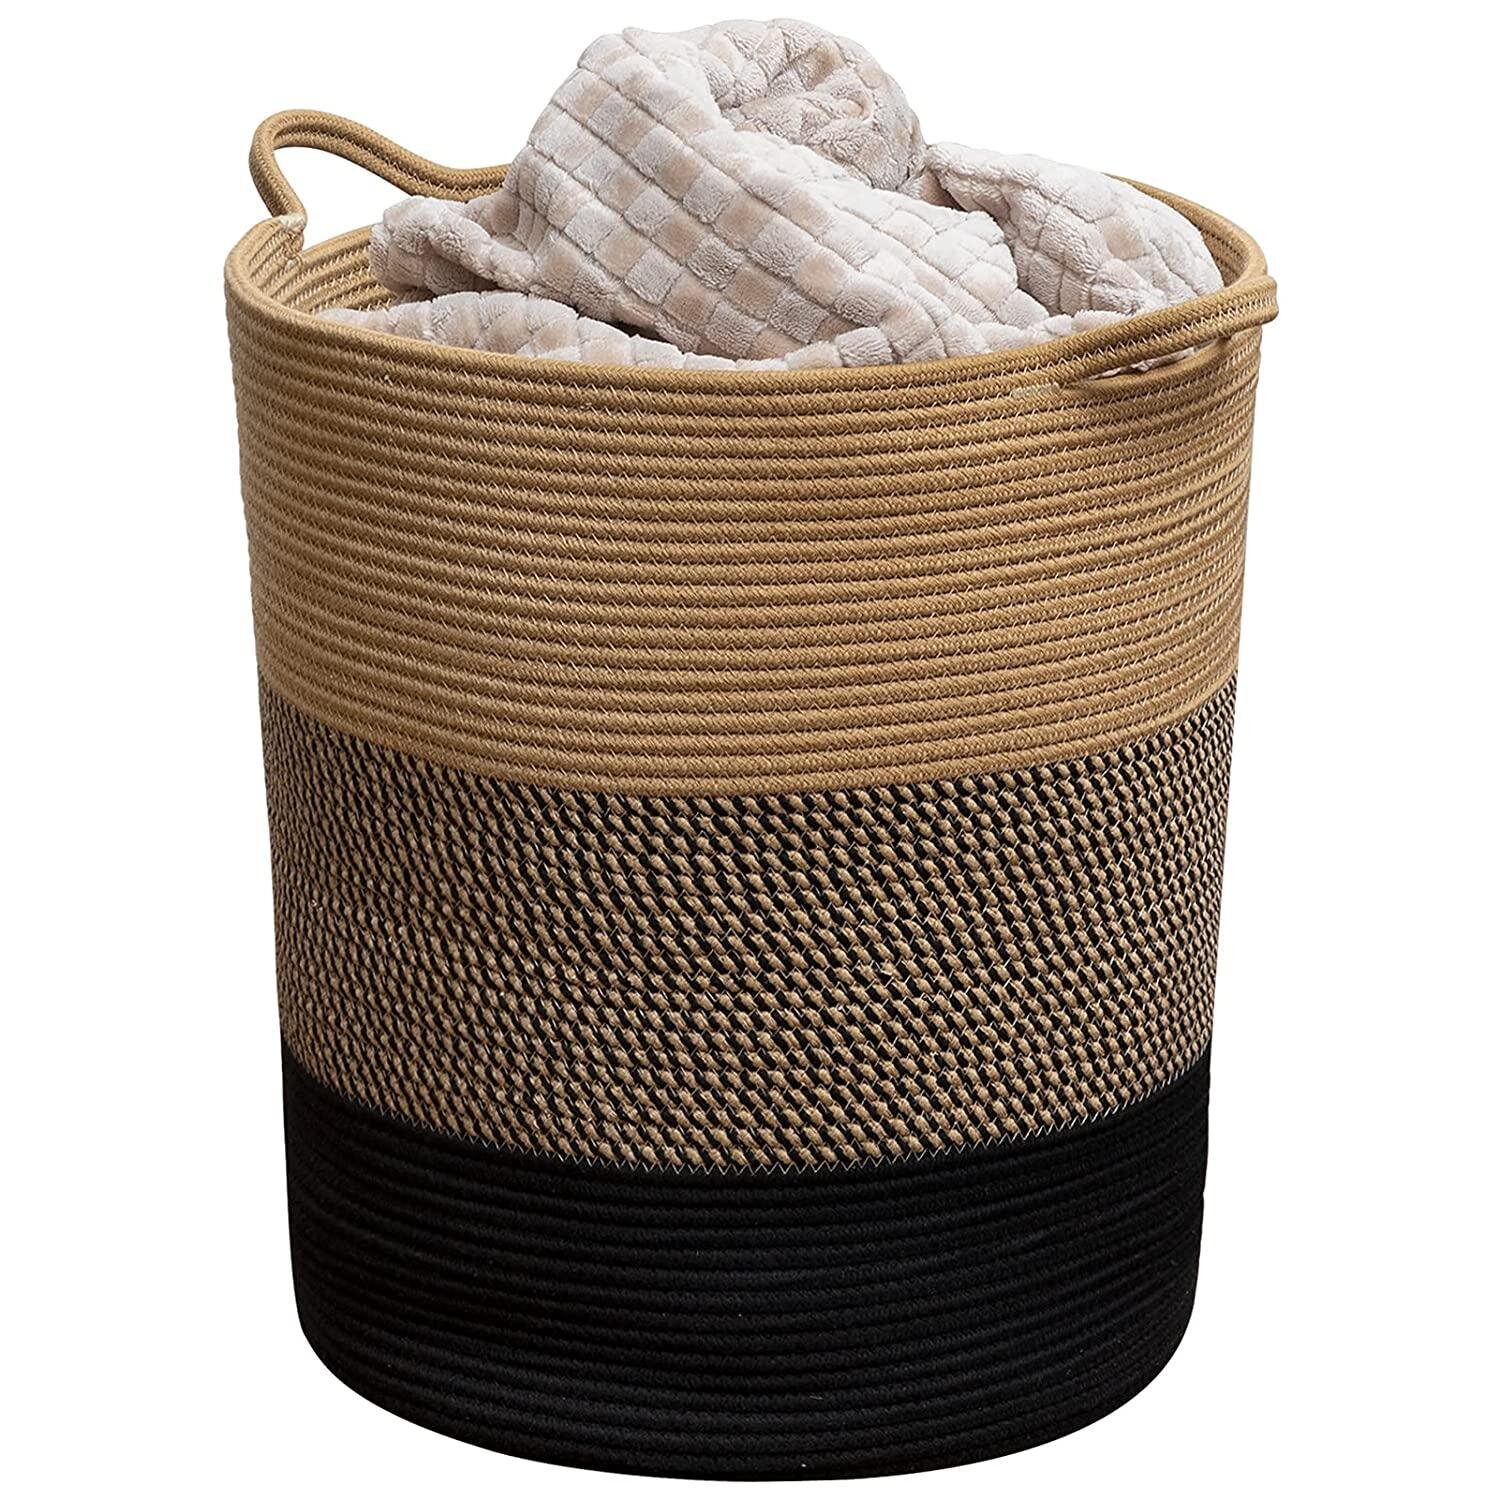 Extra Large Woven Storage Baskets Towels Coiled Round White Laundry Hamper with Handles Use for Sofa Throws Pillows 18 x 16 Decorative Blanket Basket Toys or Nursery Cotton Rope Organizer